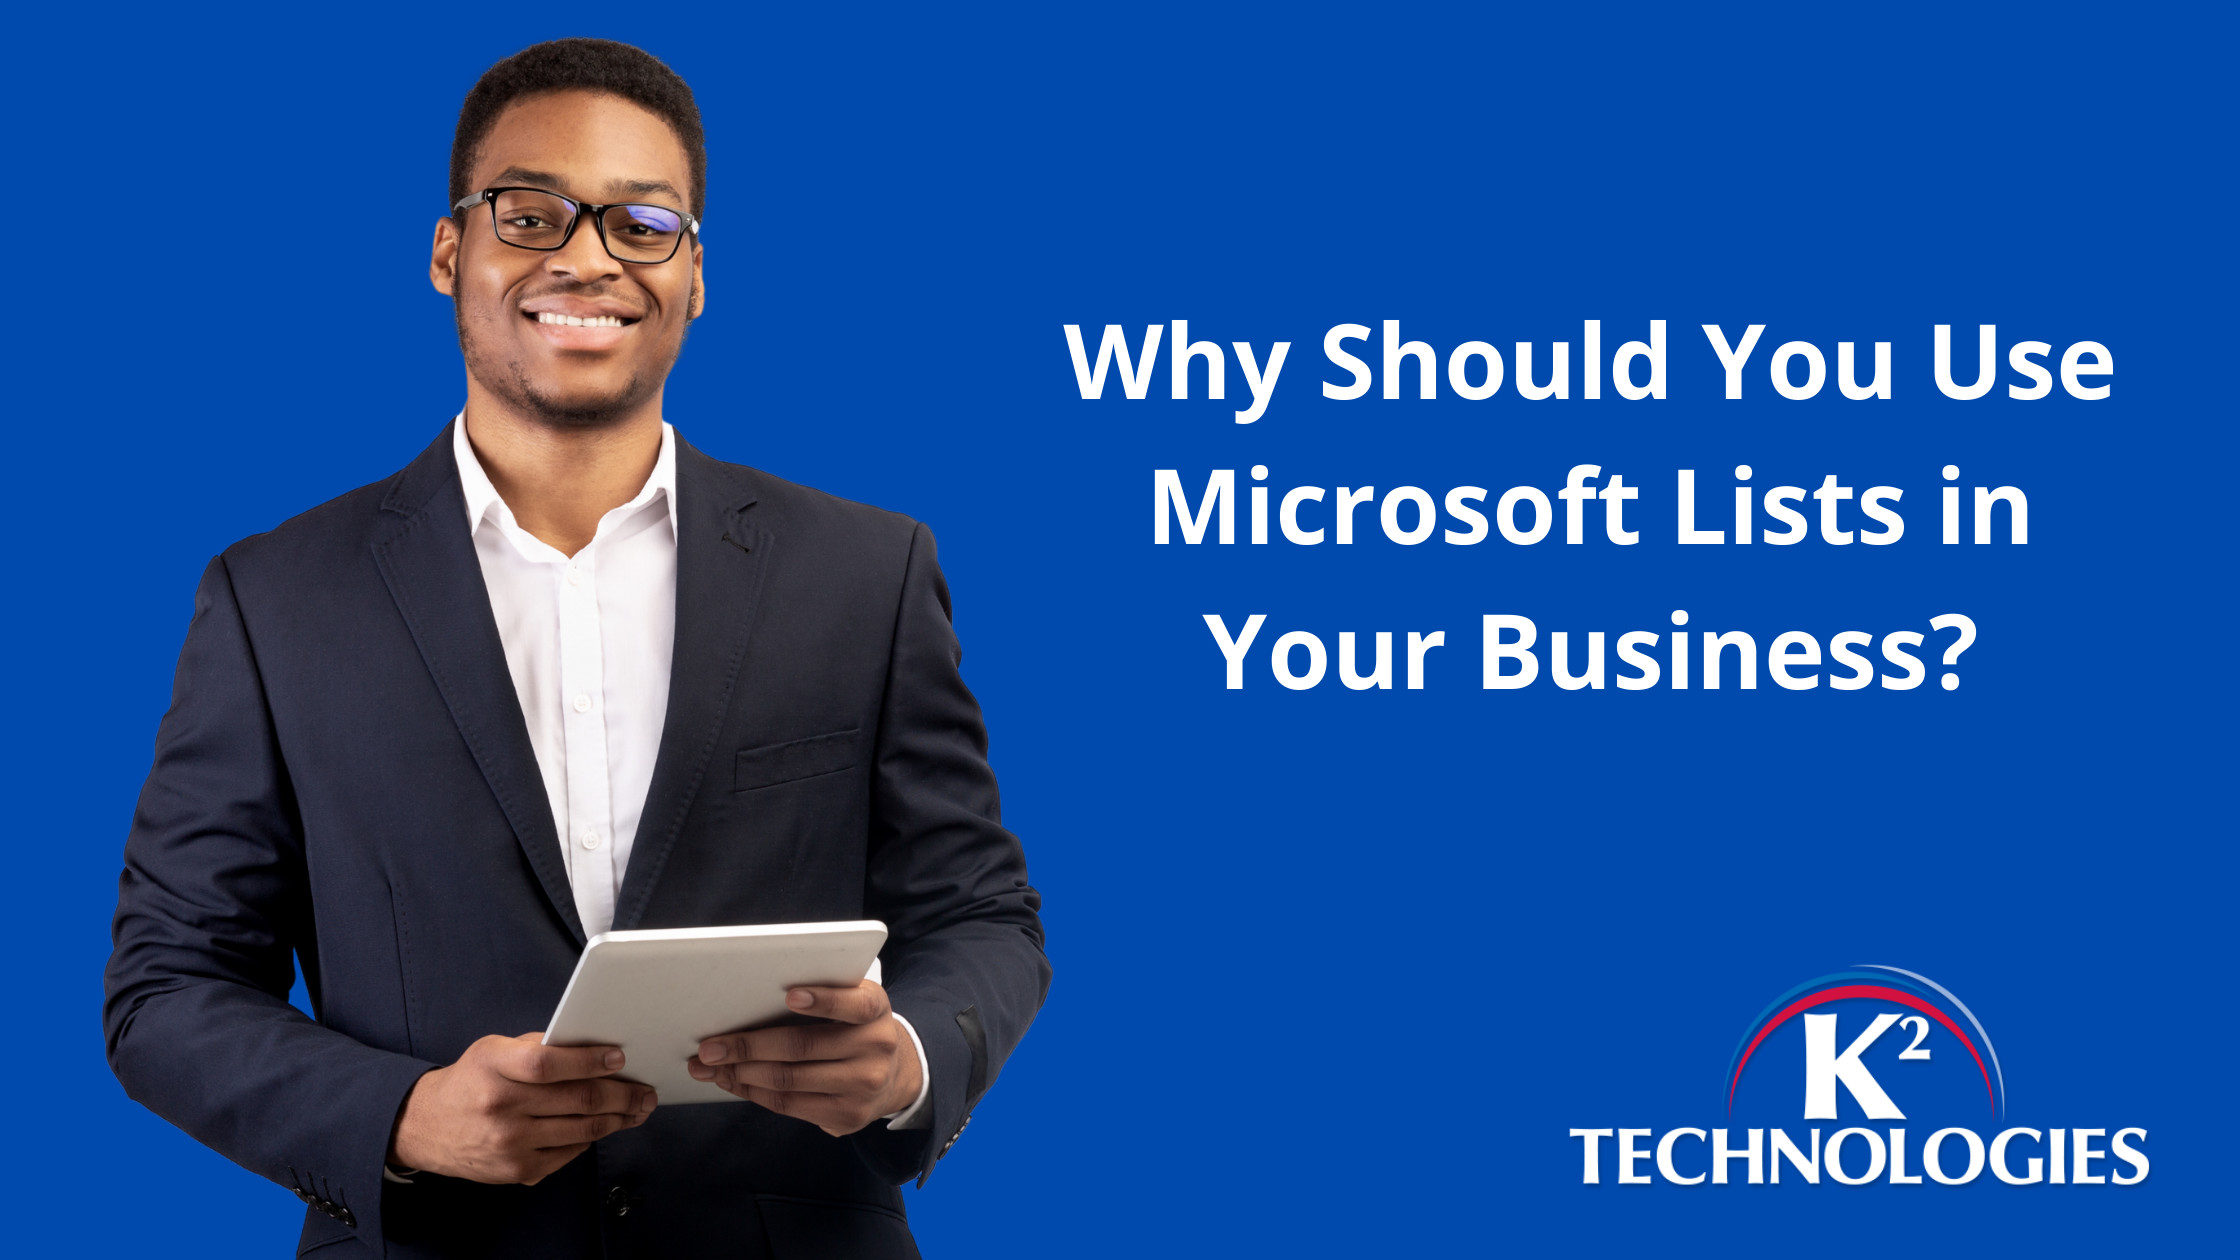 Why Should You Use Microsoft Lists in Your Business?